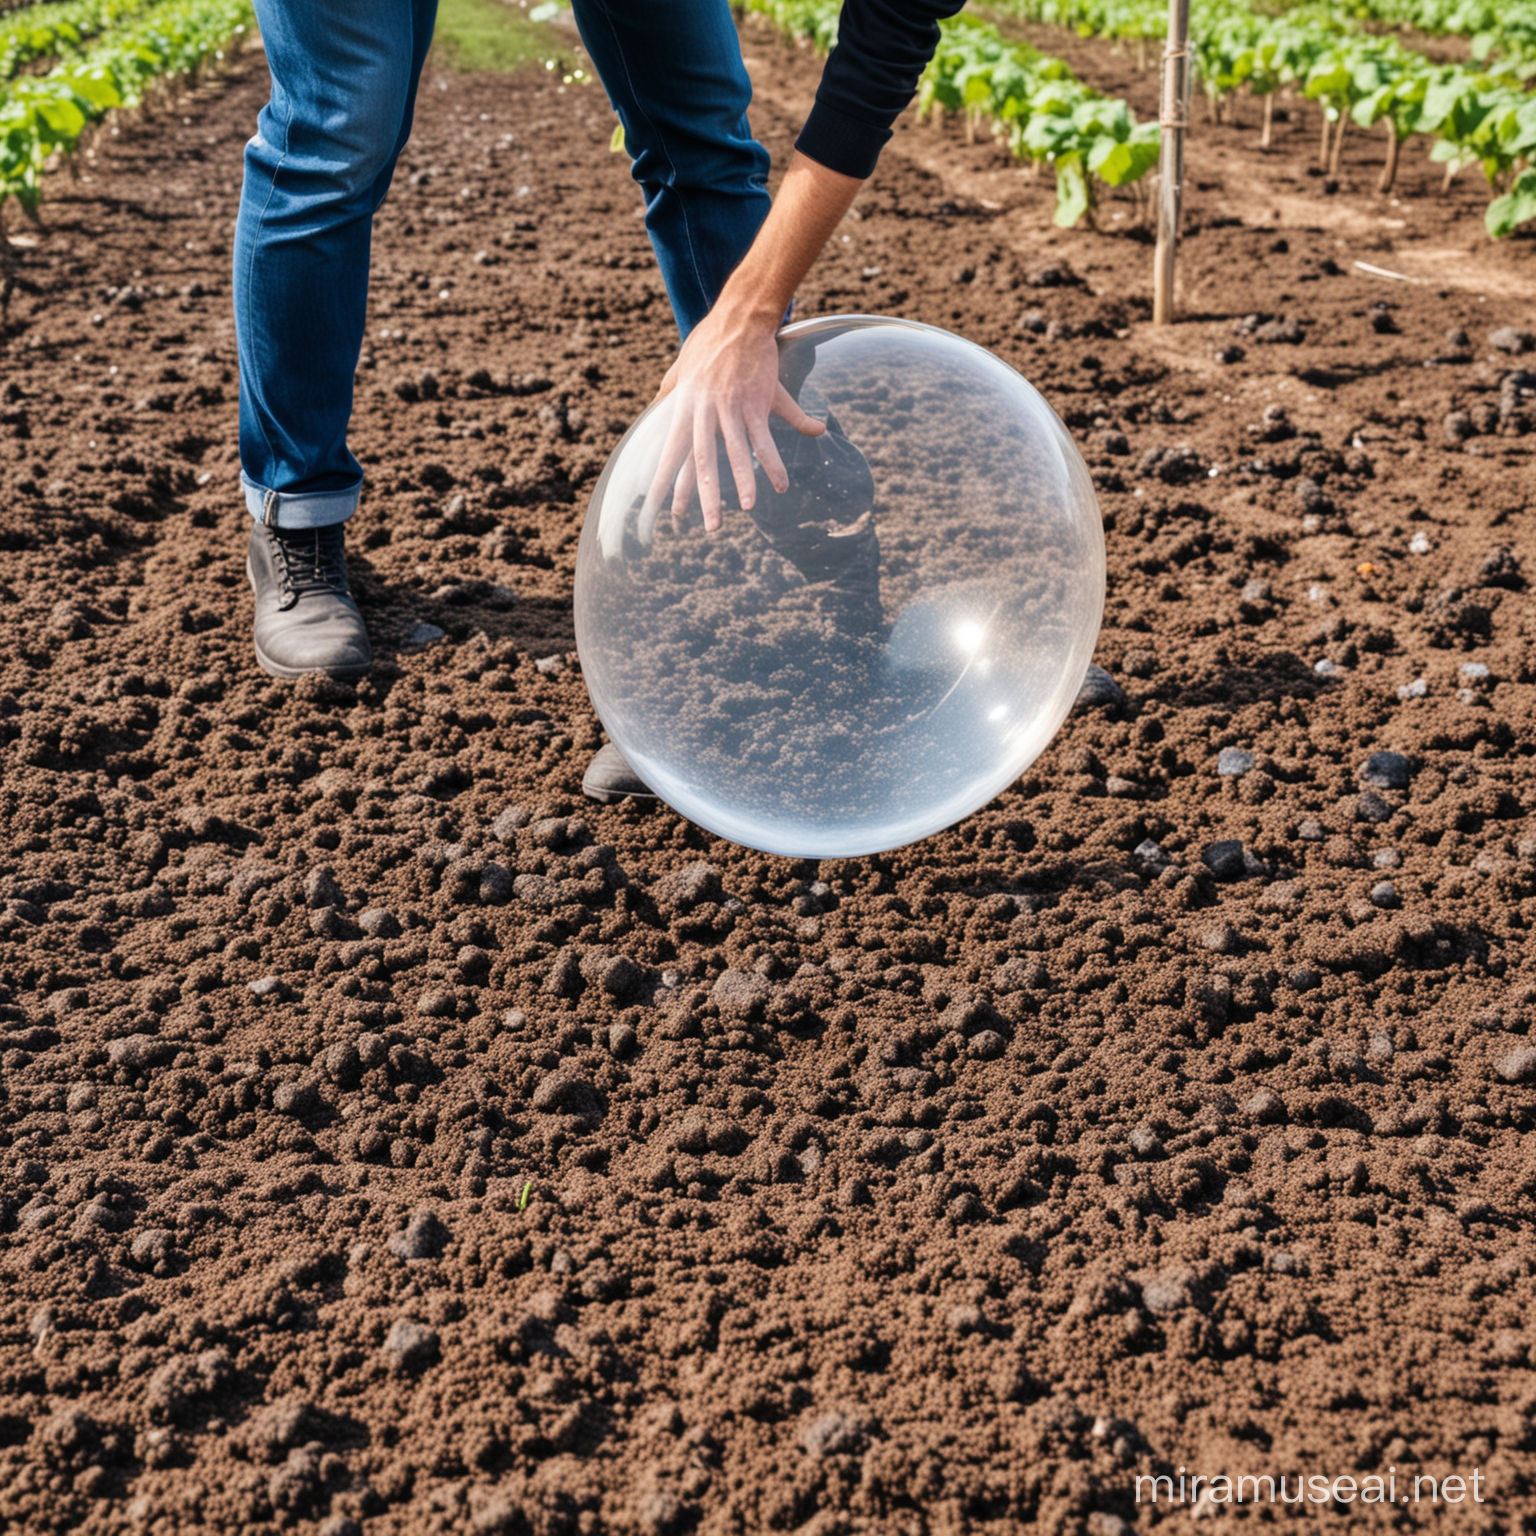  BUBBLE FARMING AND A PICTURE WHERE A FAMER IS HARVESTING THE BUBBLE FROM THE GROUND
